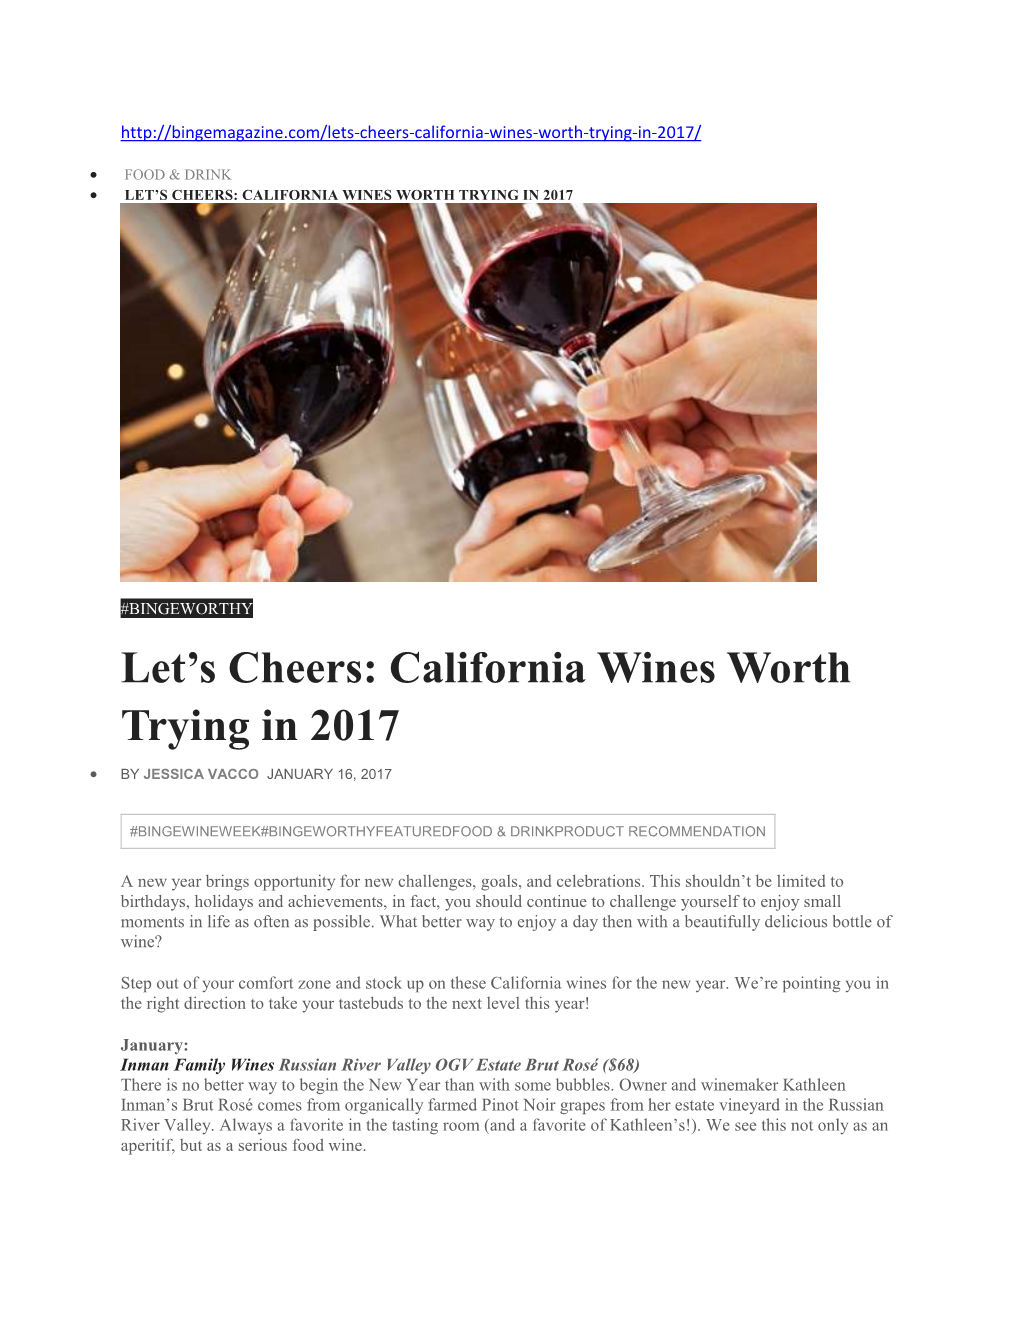 California Wines Worth Trying in 2017